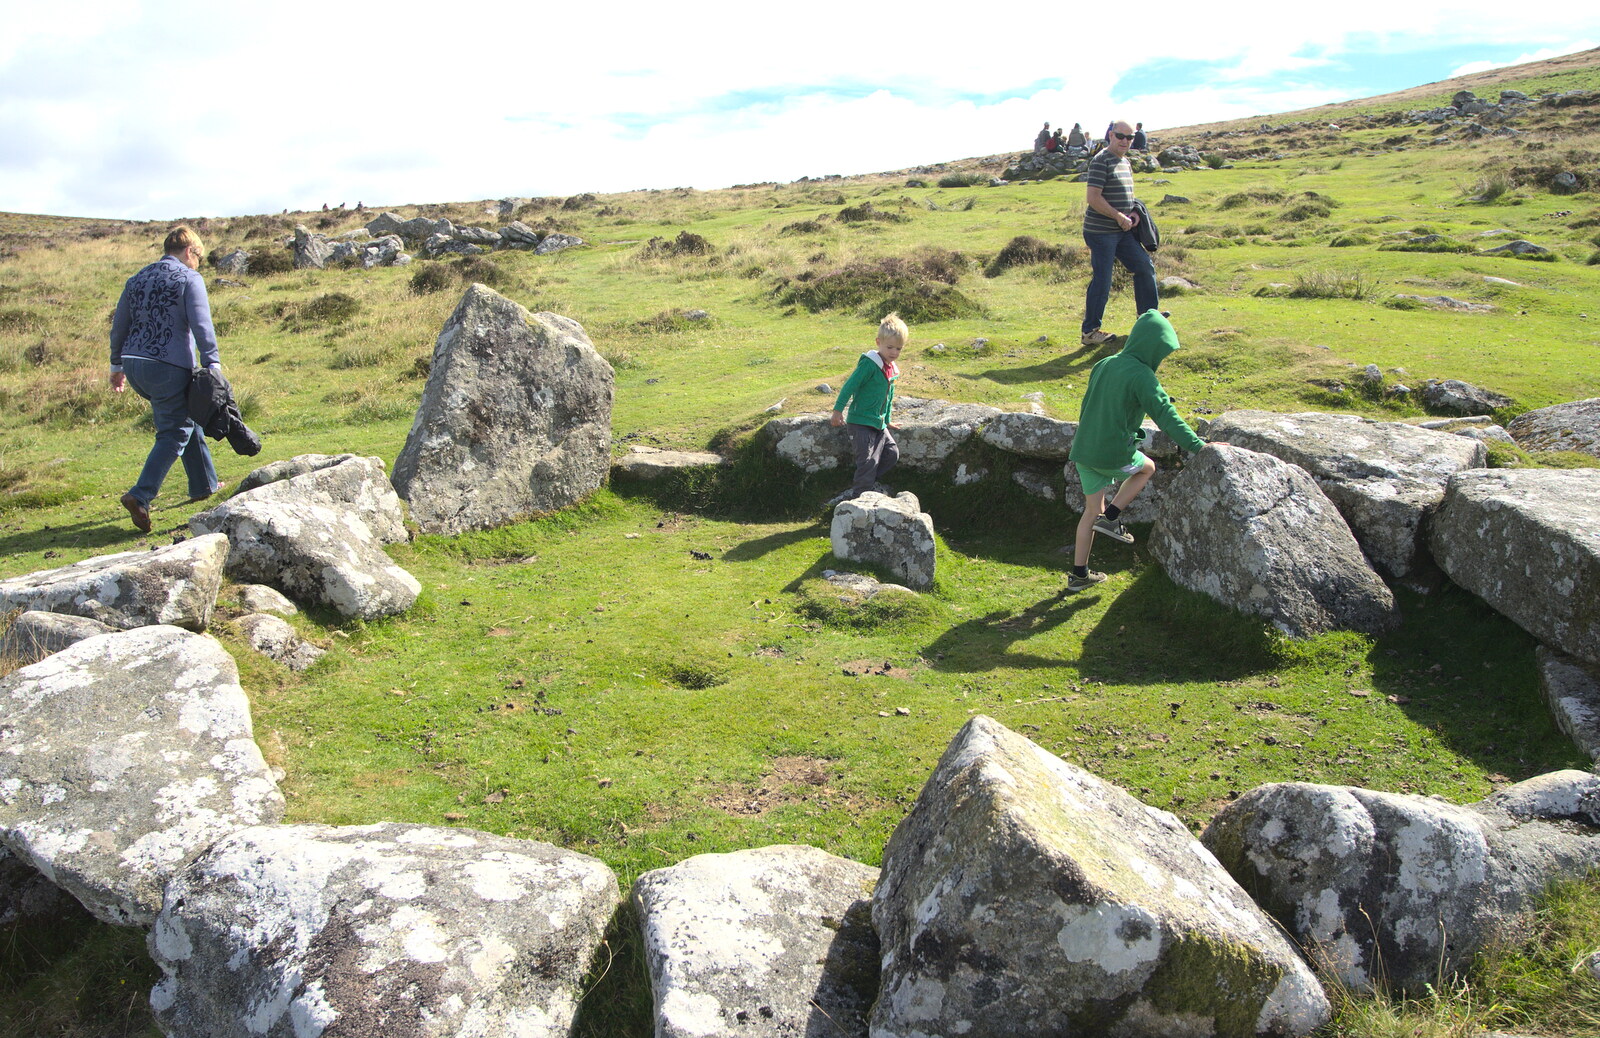 The boys in the remains of a Bronze-age dwelling from Badger's Holt and Bronze-Age Grimspound, Dartmoor, Devon - 10th August 2016